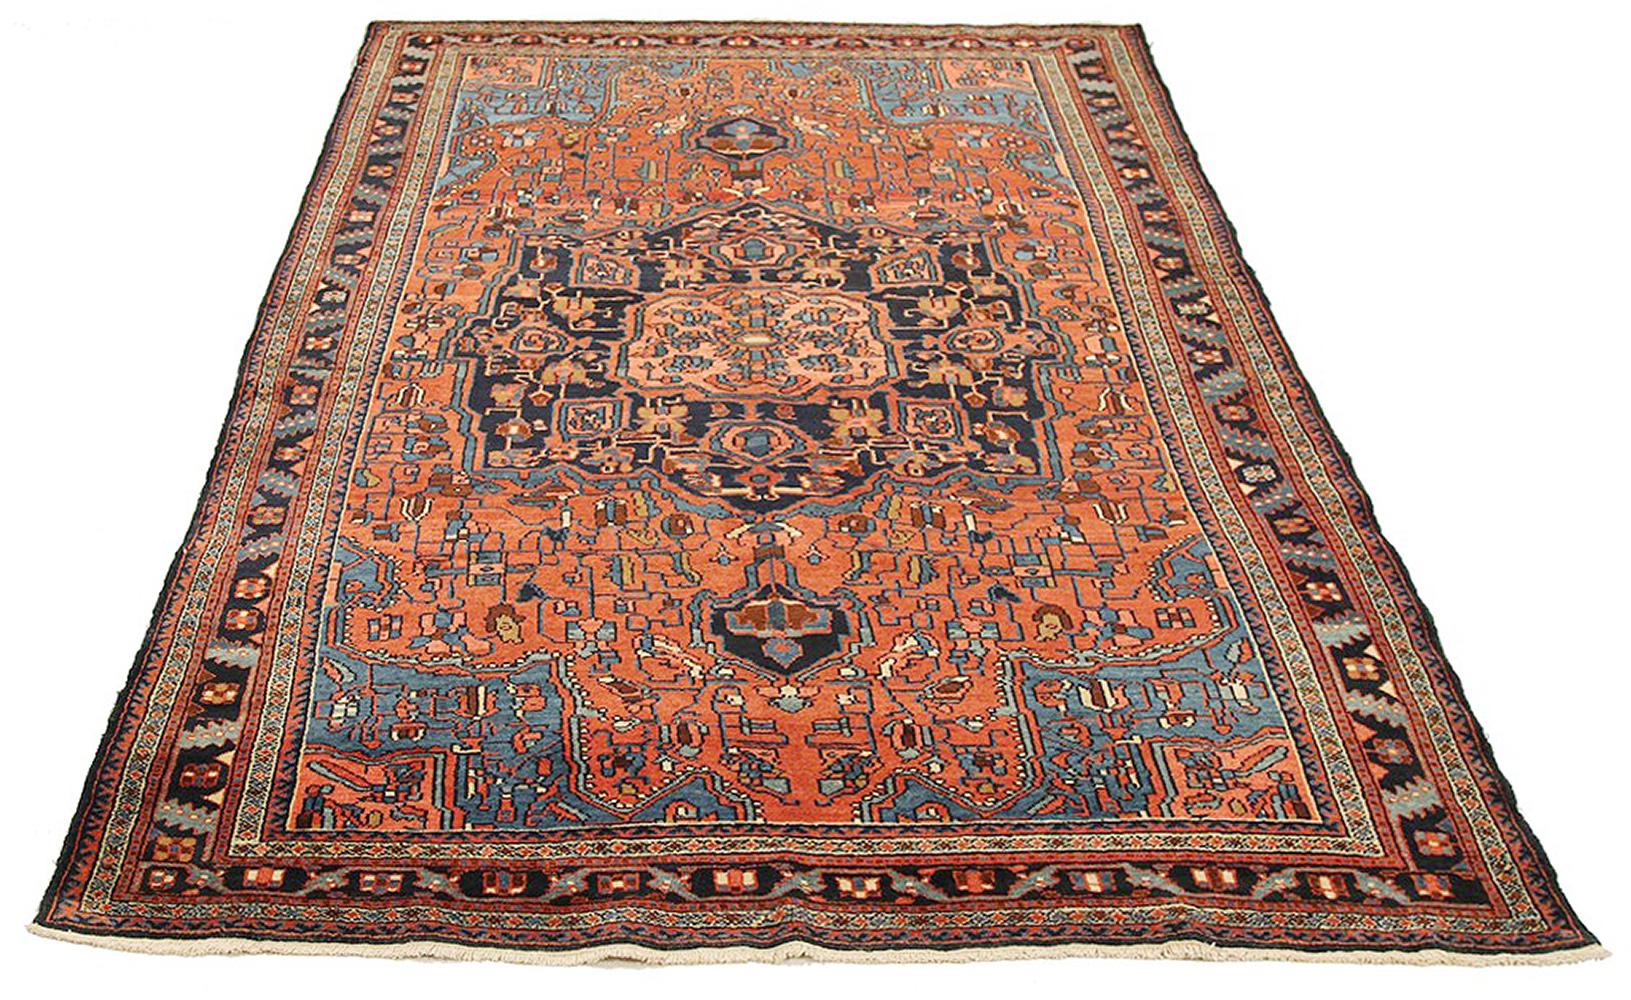 Antique Persian rug handwoven from the finest sheep’s wool and colored with all-natural vegetable dyes that are safe for humans and pets. It’s a traditional Hamedan design featuring floral patterns in red and blue on a black field. The details are